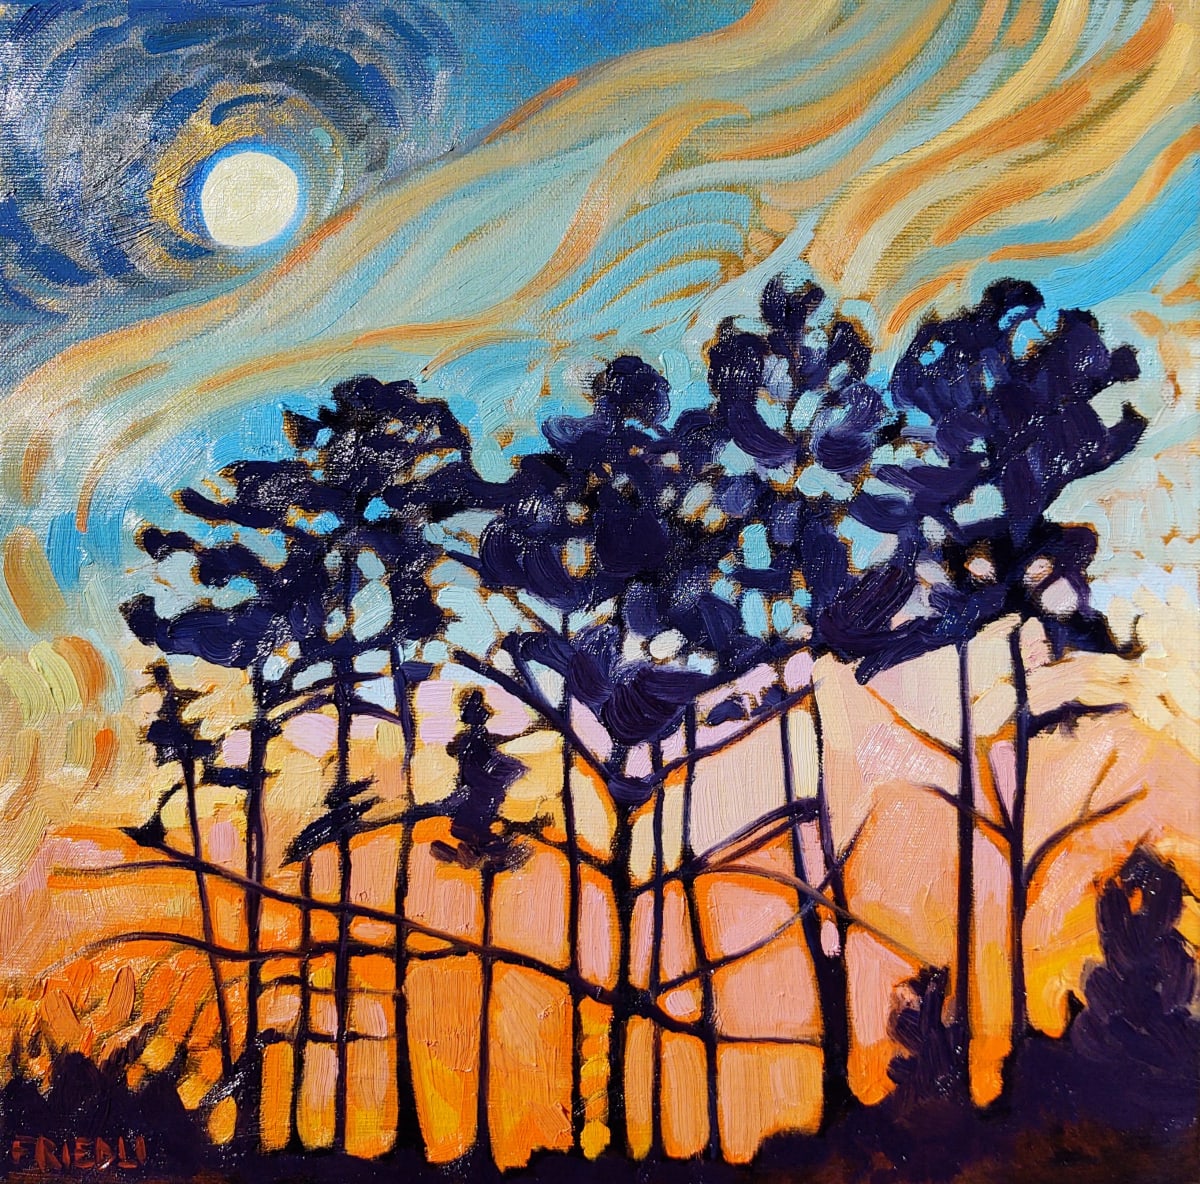 Southern Pines  Image: Tall Southern pines reach up toward moonrise. Branches aloft, sugar-rays leap over horizon, one last show a rainbow glow. Dreamy clouds float above the trees, spirits lifting off in golden symphony.